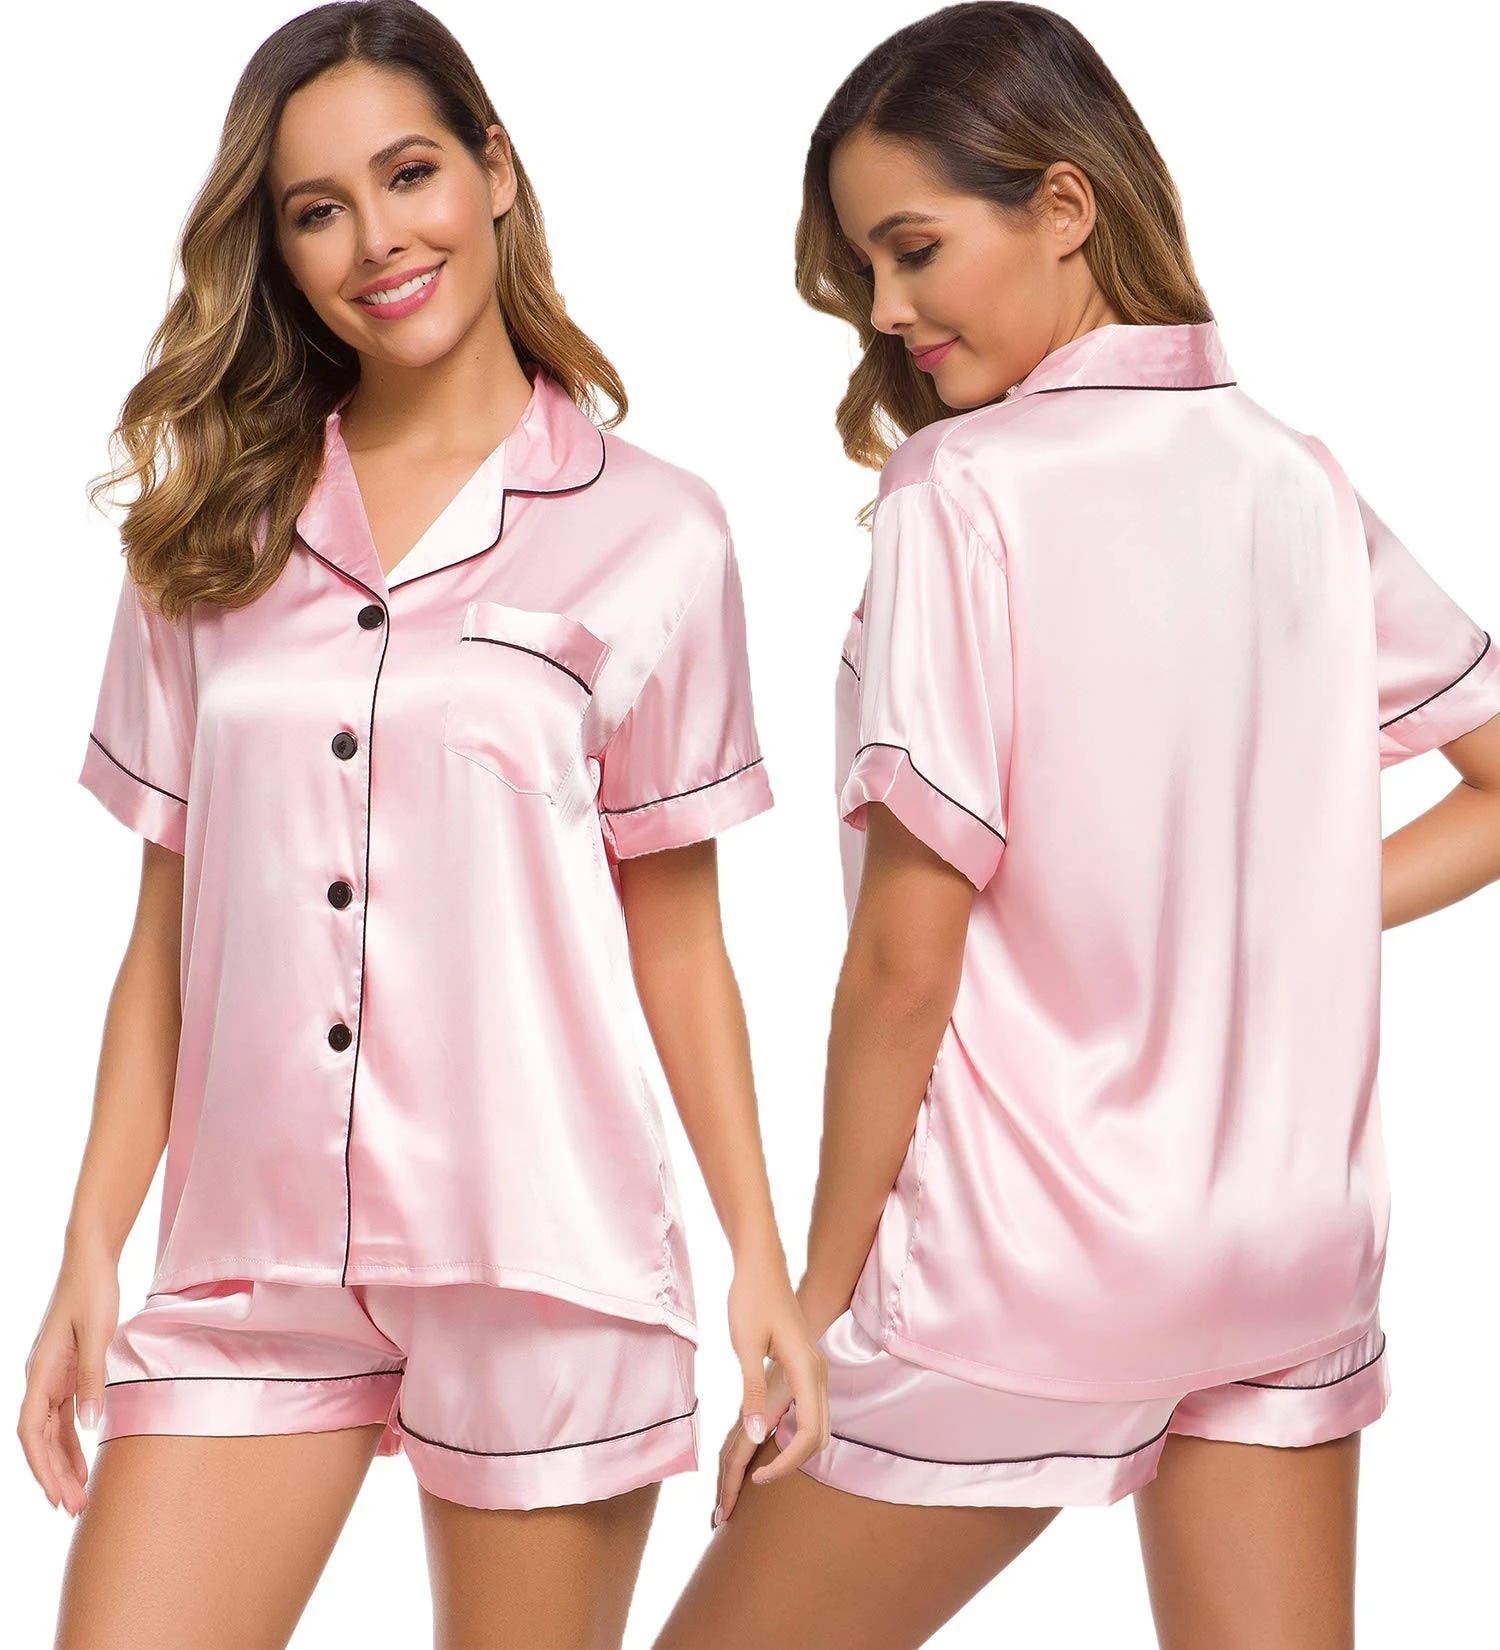 Cute Women's Pink Satin Pajamas for a Comfortable Night's Rest | Image